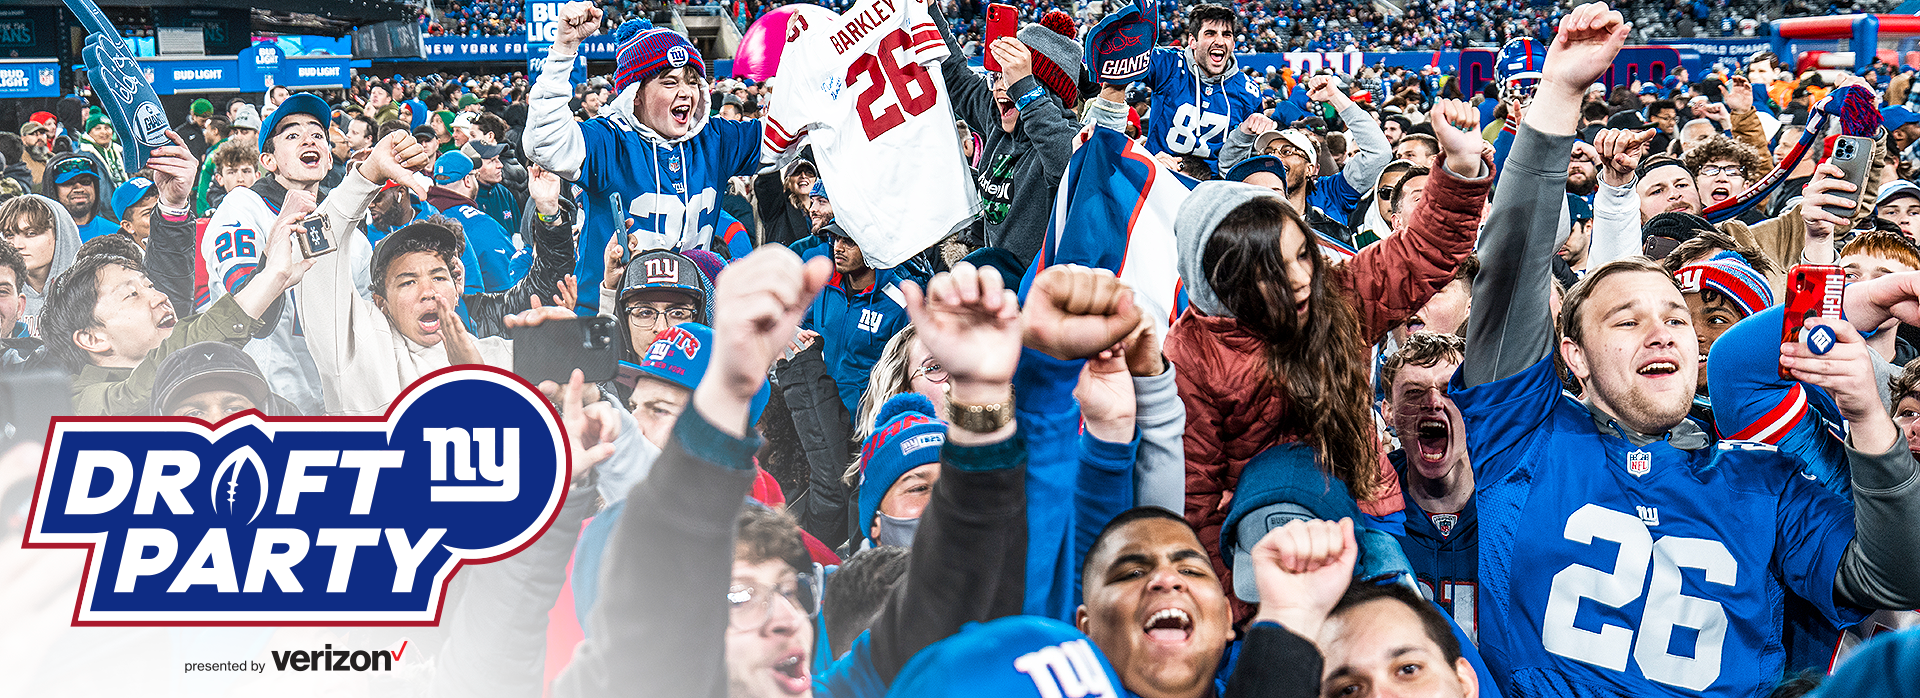 Giants Draft Party  Giants Draft Party Presented by Verizon, MetLife  Stadium, Thursday, April 27, 7 PM ET